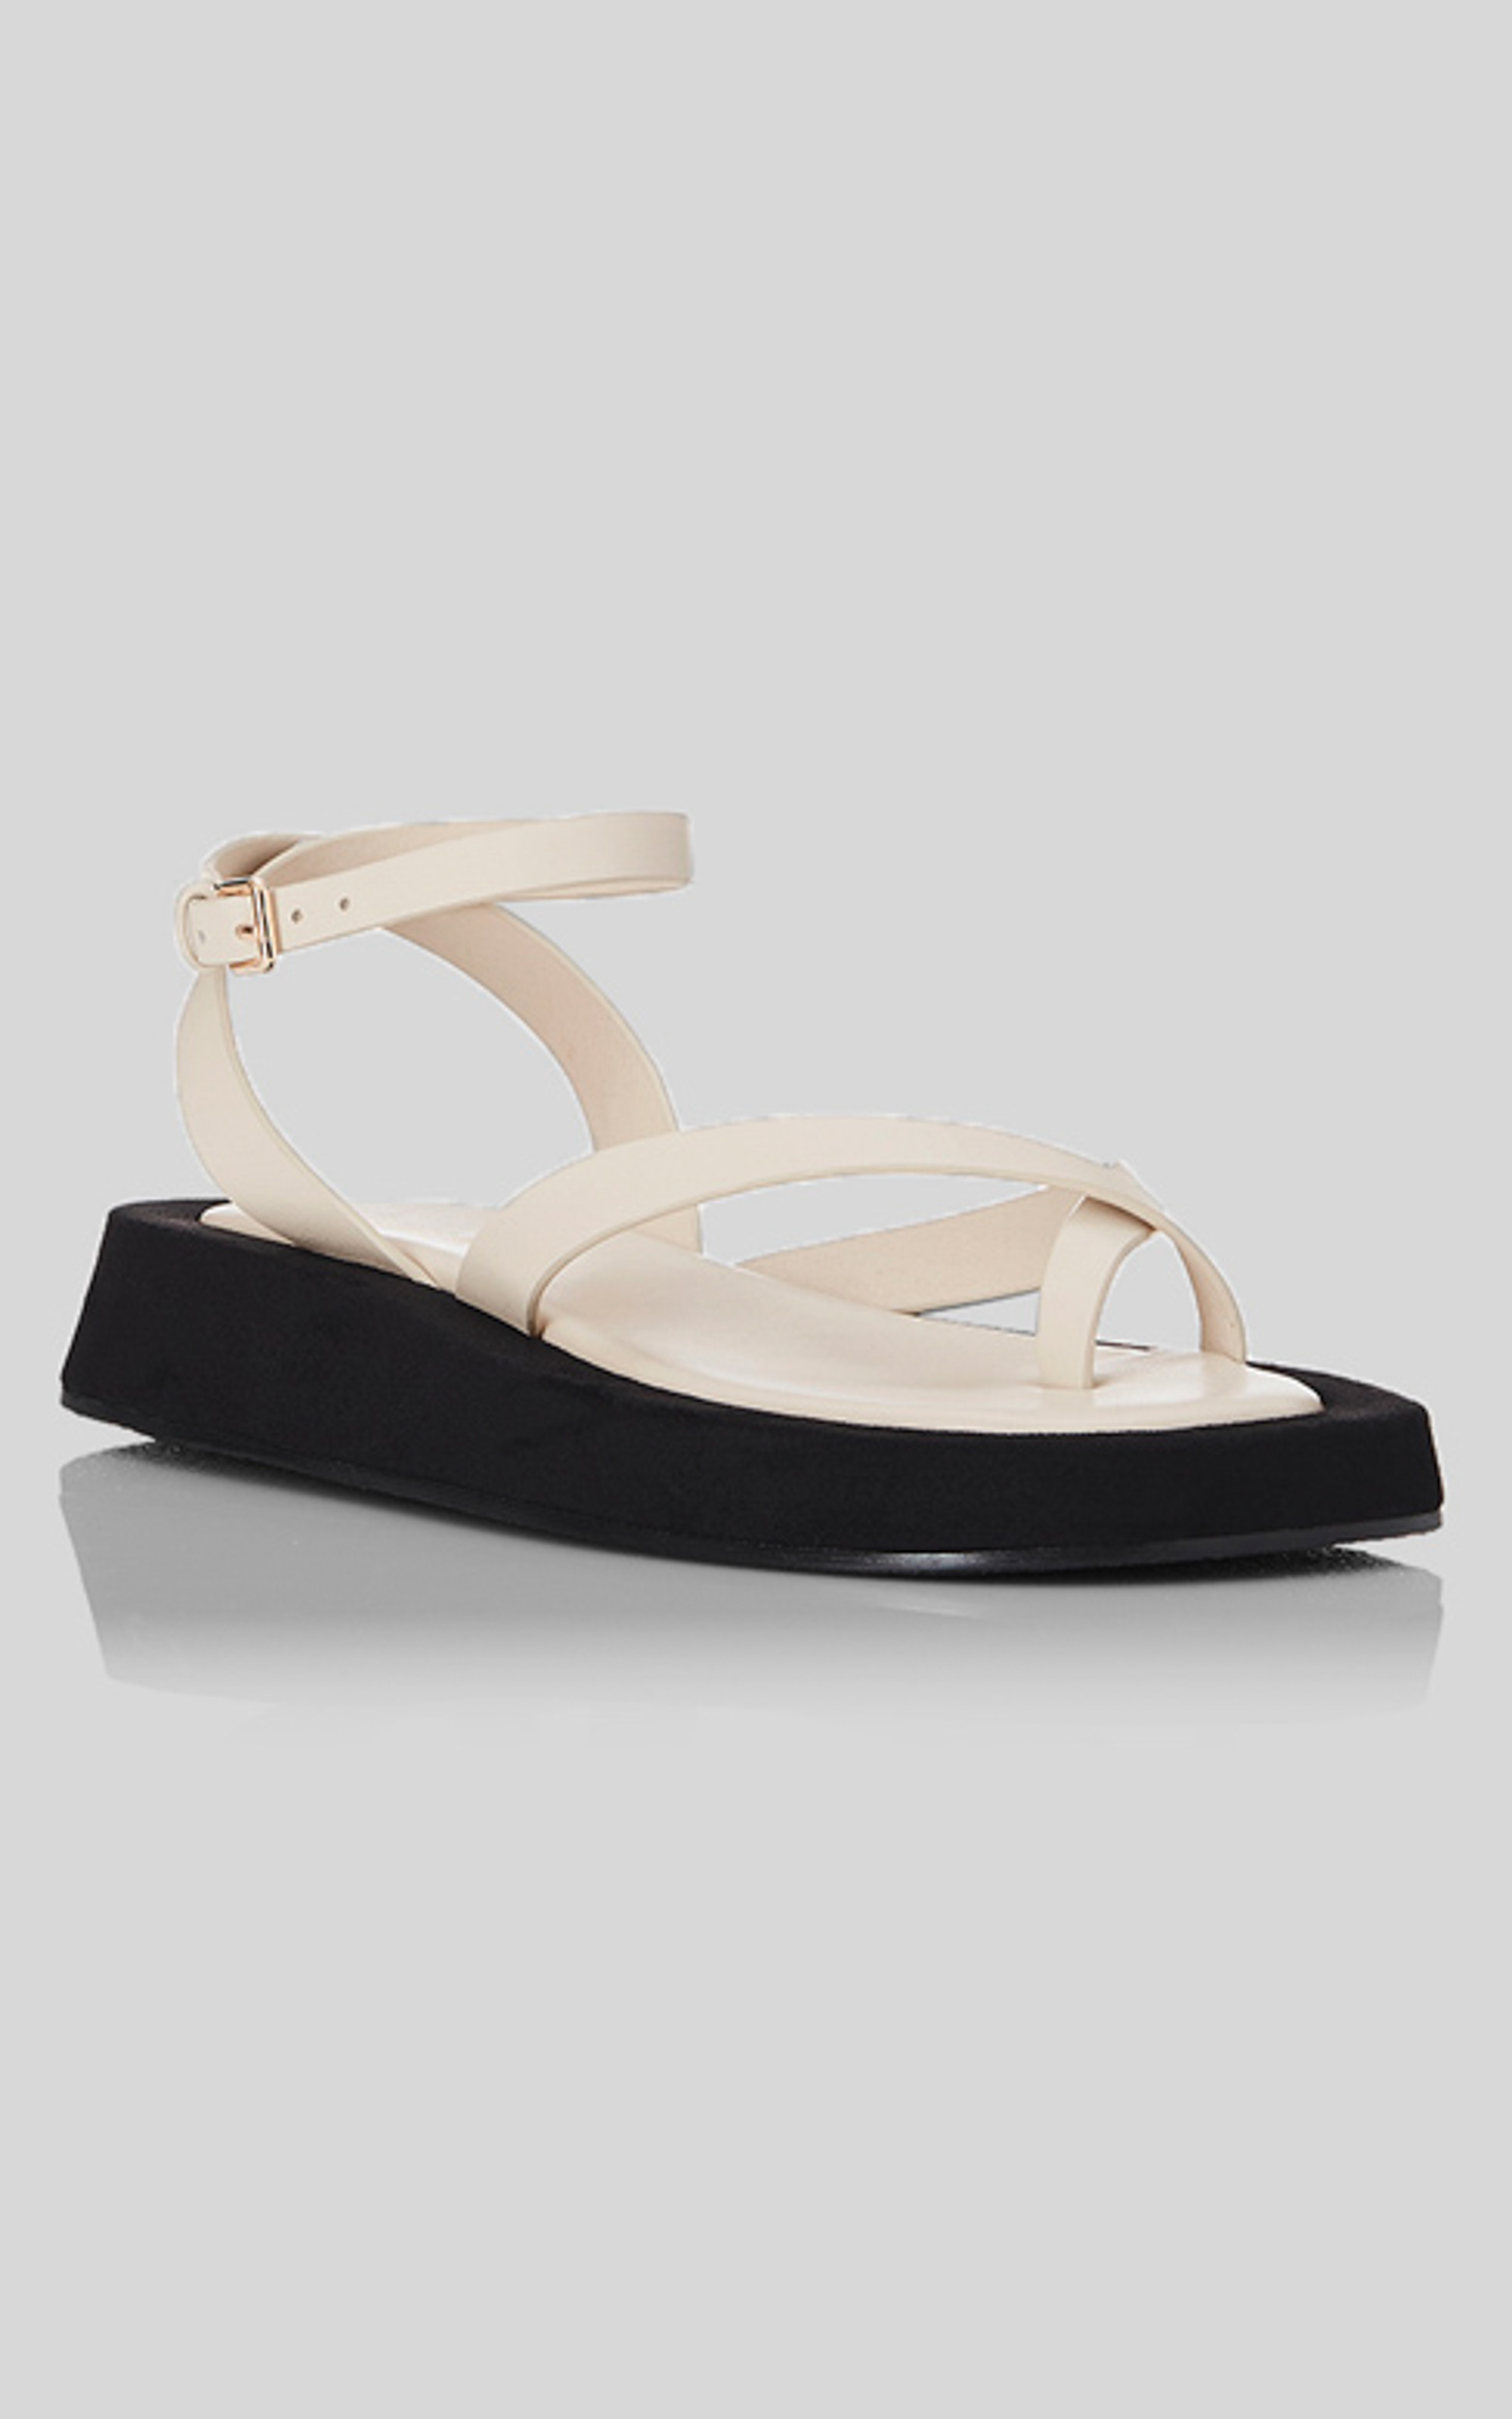 Alias Mae - Polly Sandals in Bone Leather - 05, BRN2, hi-res image number null